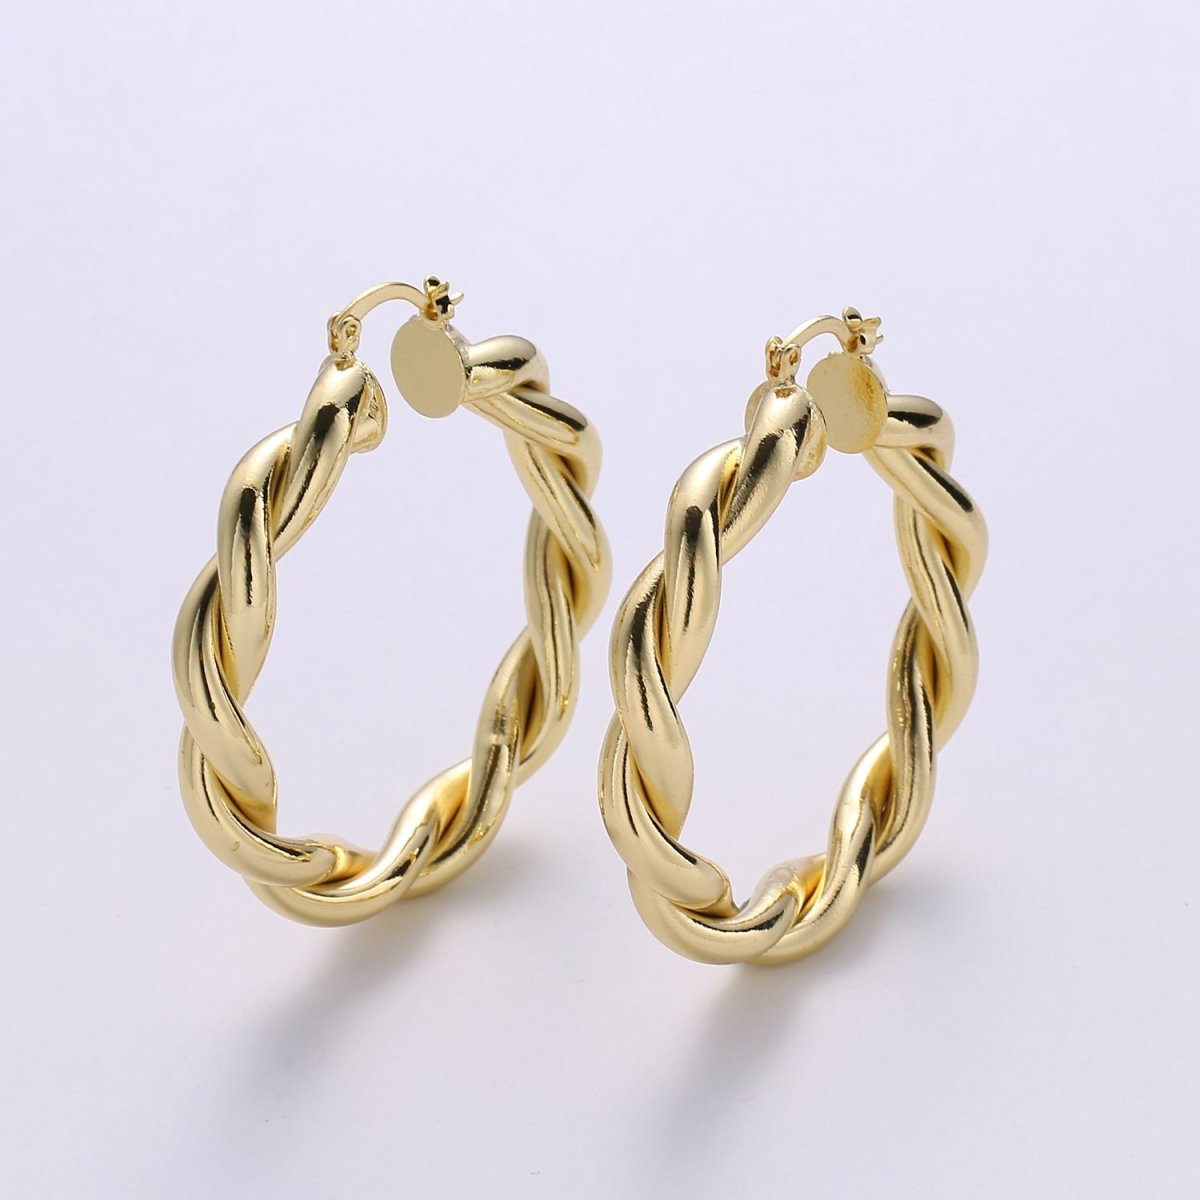 Gold Twisted Hoop Earrings, Bold Gold Hoop Earrings, Chunky Earrings, Statement Hoops, 14k Gold Filled Hoops Earring gift for her Q-518 to Q-520 - DLUXCA